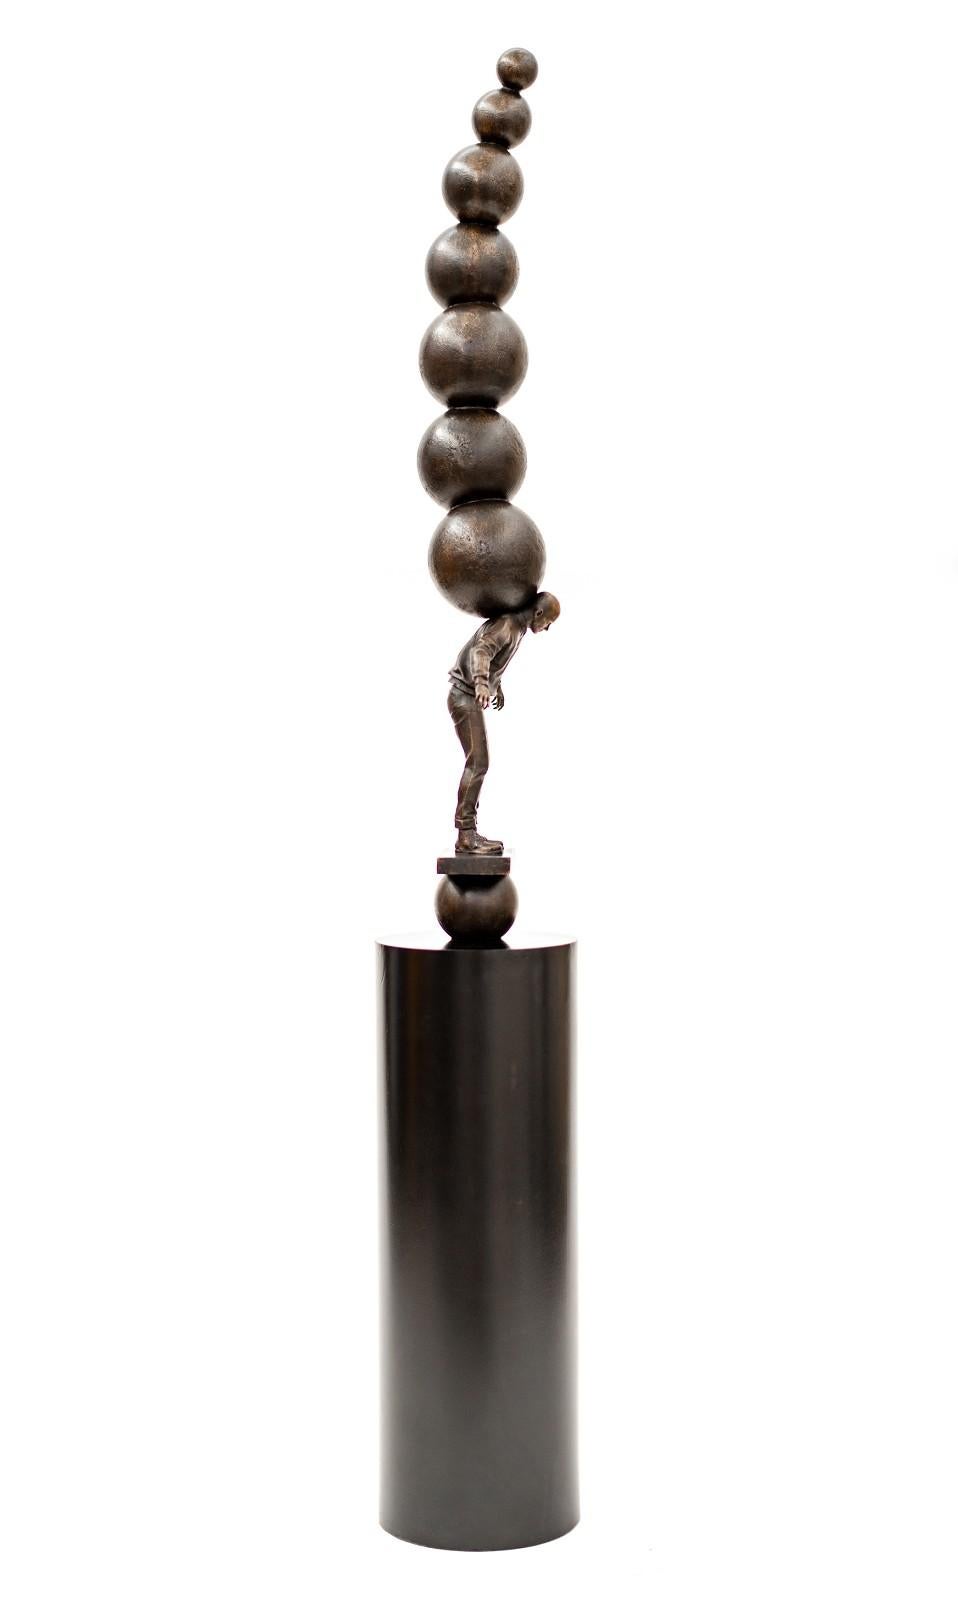 Semblance of Balance - Bronze casted male figure with stacked spheres - Contemporary Sculpture by Roch Smith